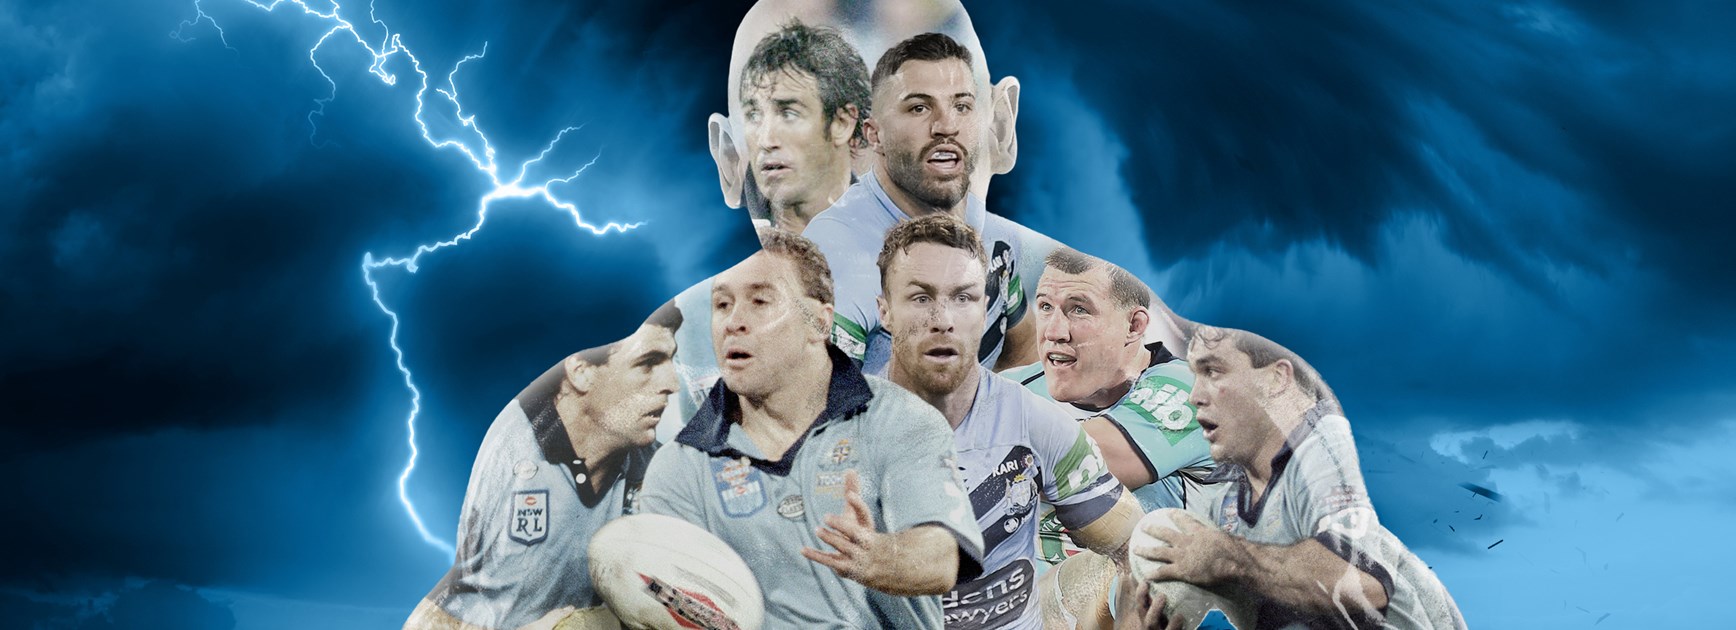 Blues Frankenstein: The NSW stars who make monster of a player